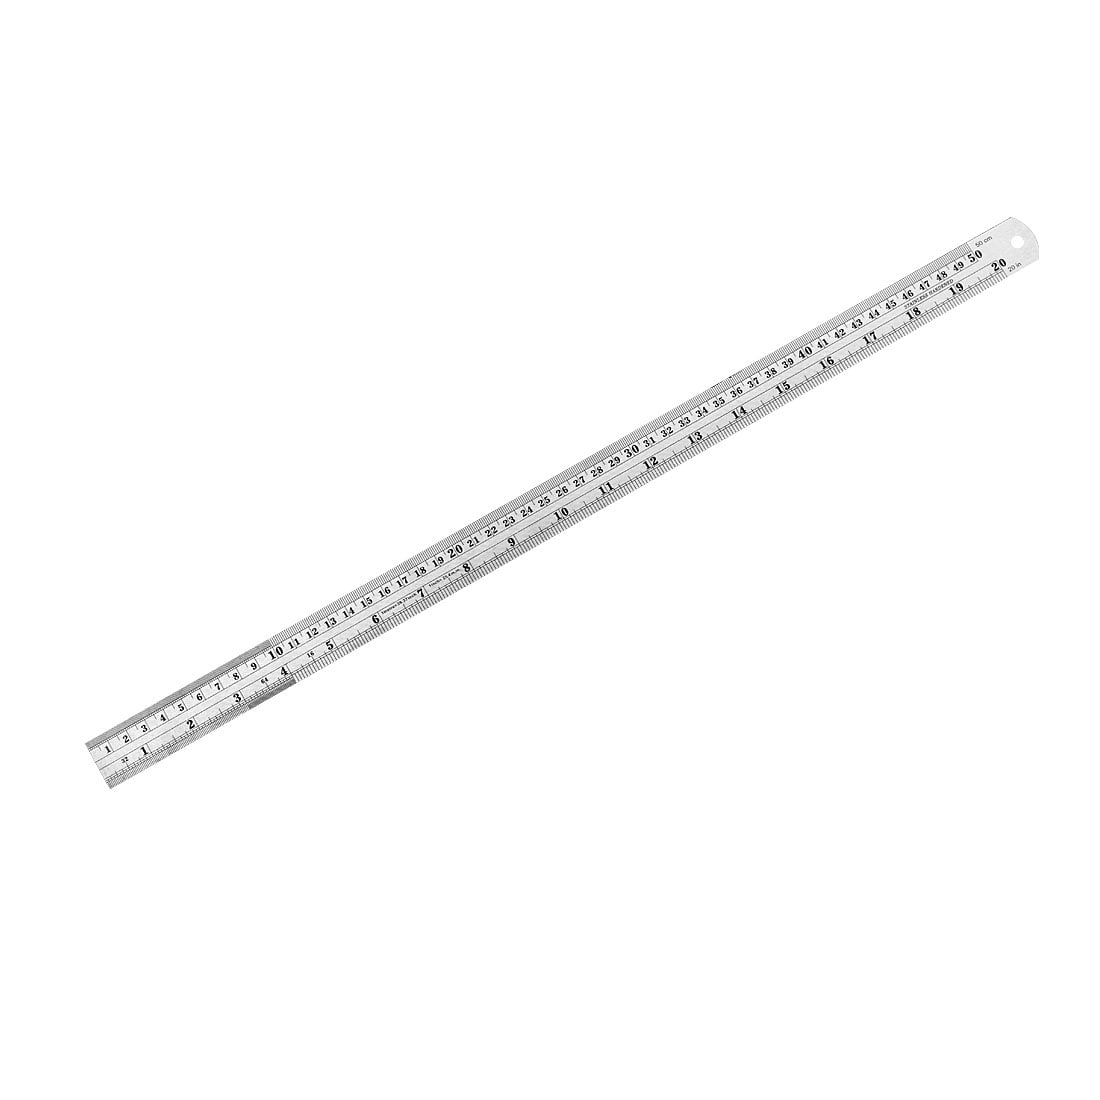 by Breman Perfect Straight Edge Measuring 1pcs Easy Read Ruler Stainless Steel 